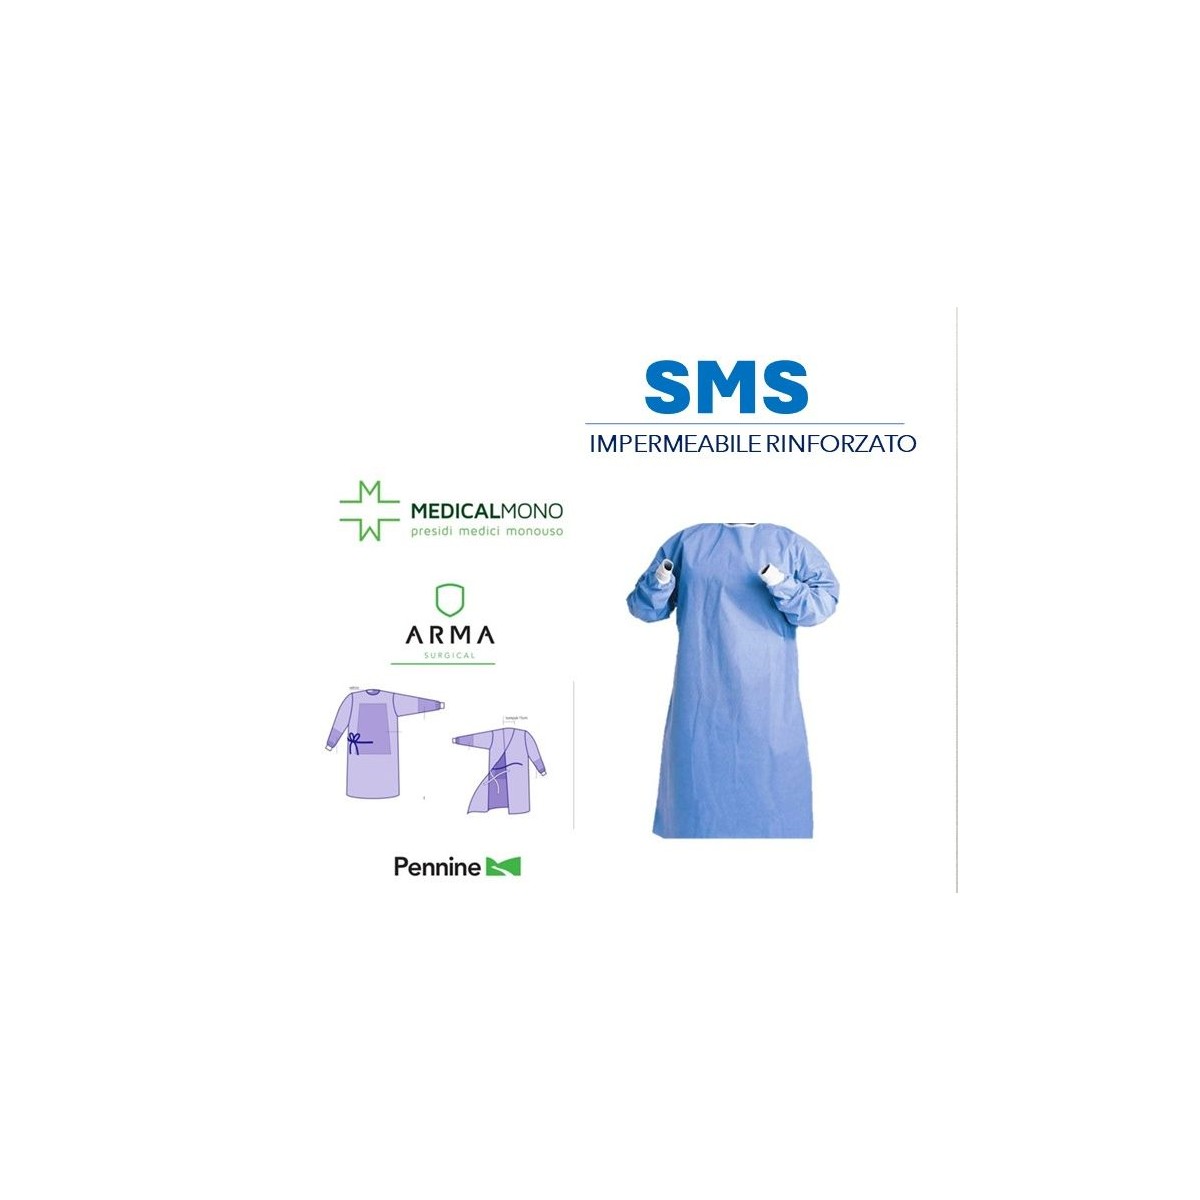 Camice chirurgico ARMA SMS Reinforced STERILE  - Tg. L